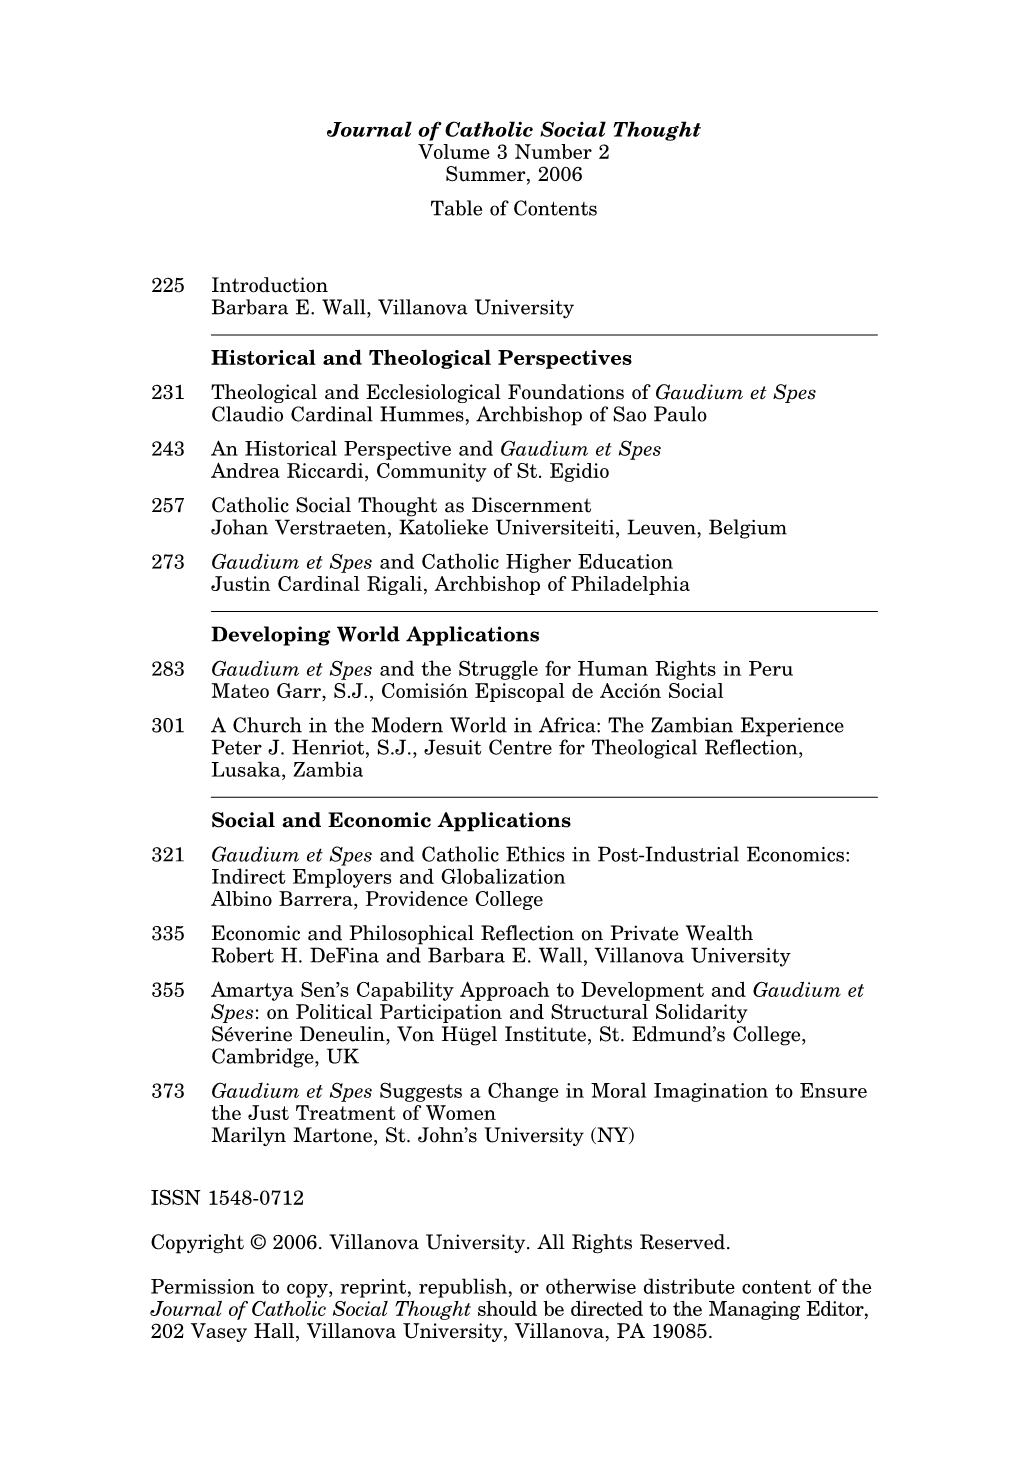 Journal of Catholic Social Thought Volume 3 Number 2 Summer, 2006 Table of Contents